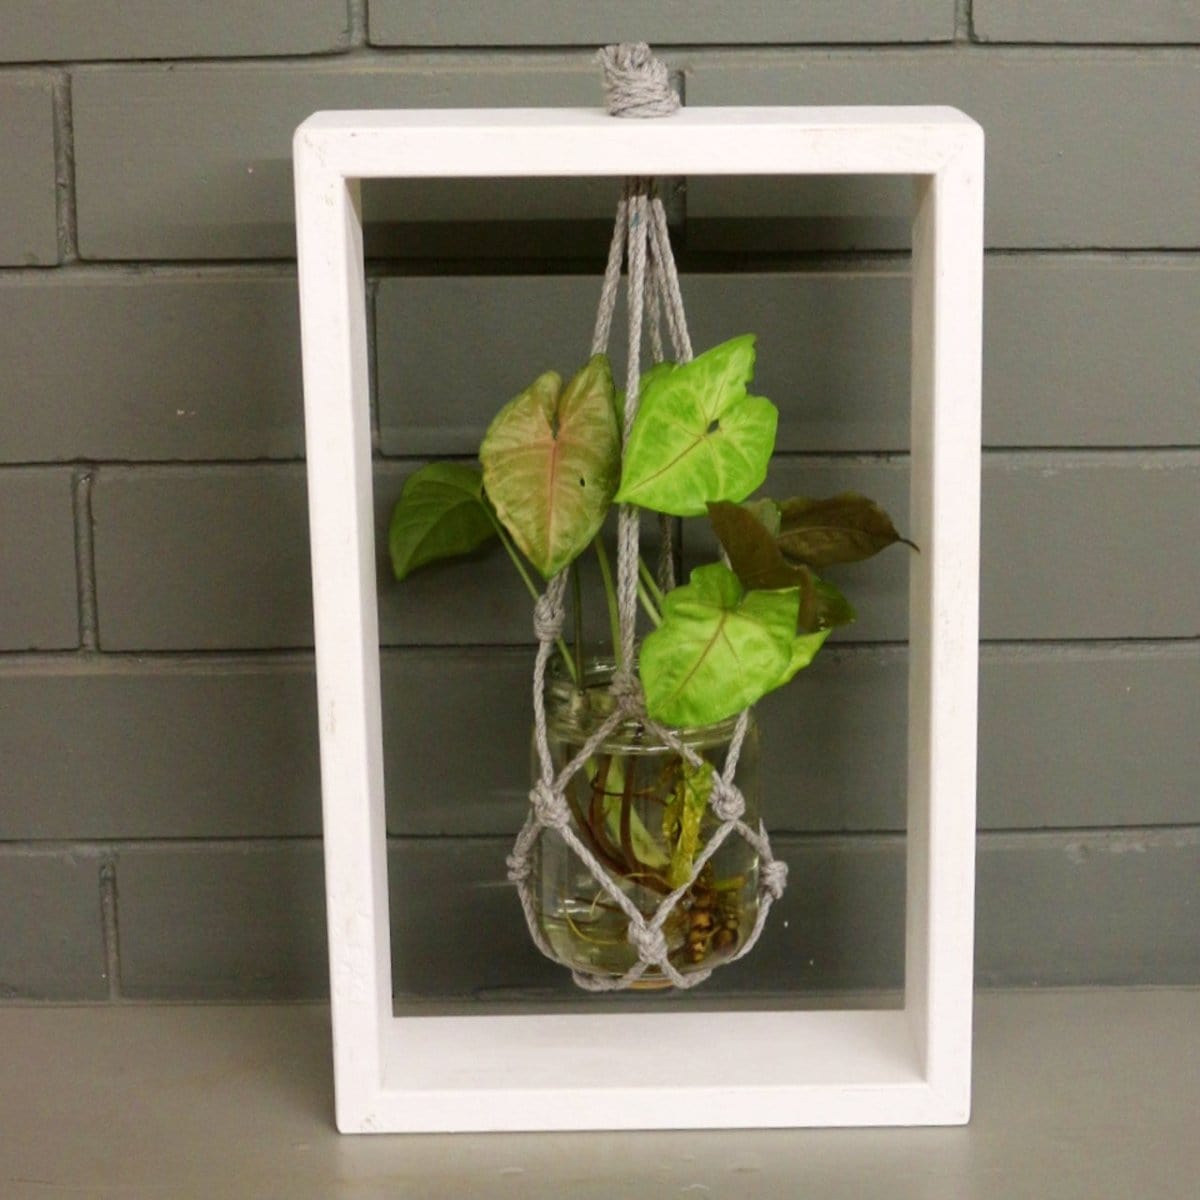 Barish Table Top Planter Wooden Frame (Single) Best Home Decor Handcrafted